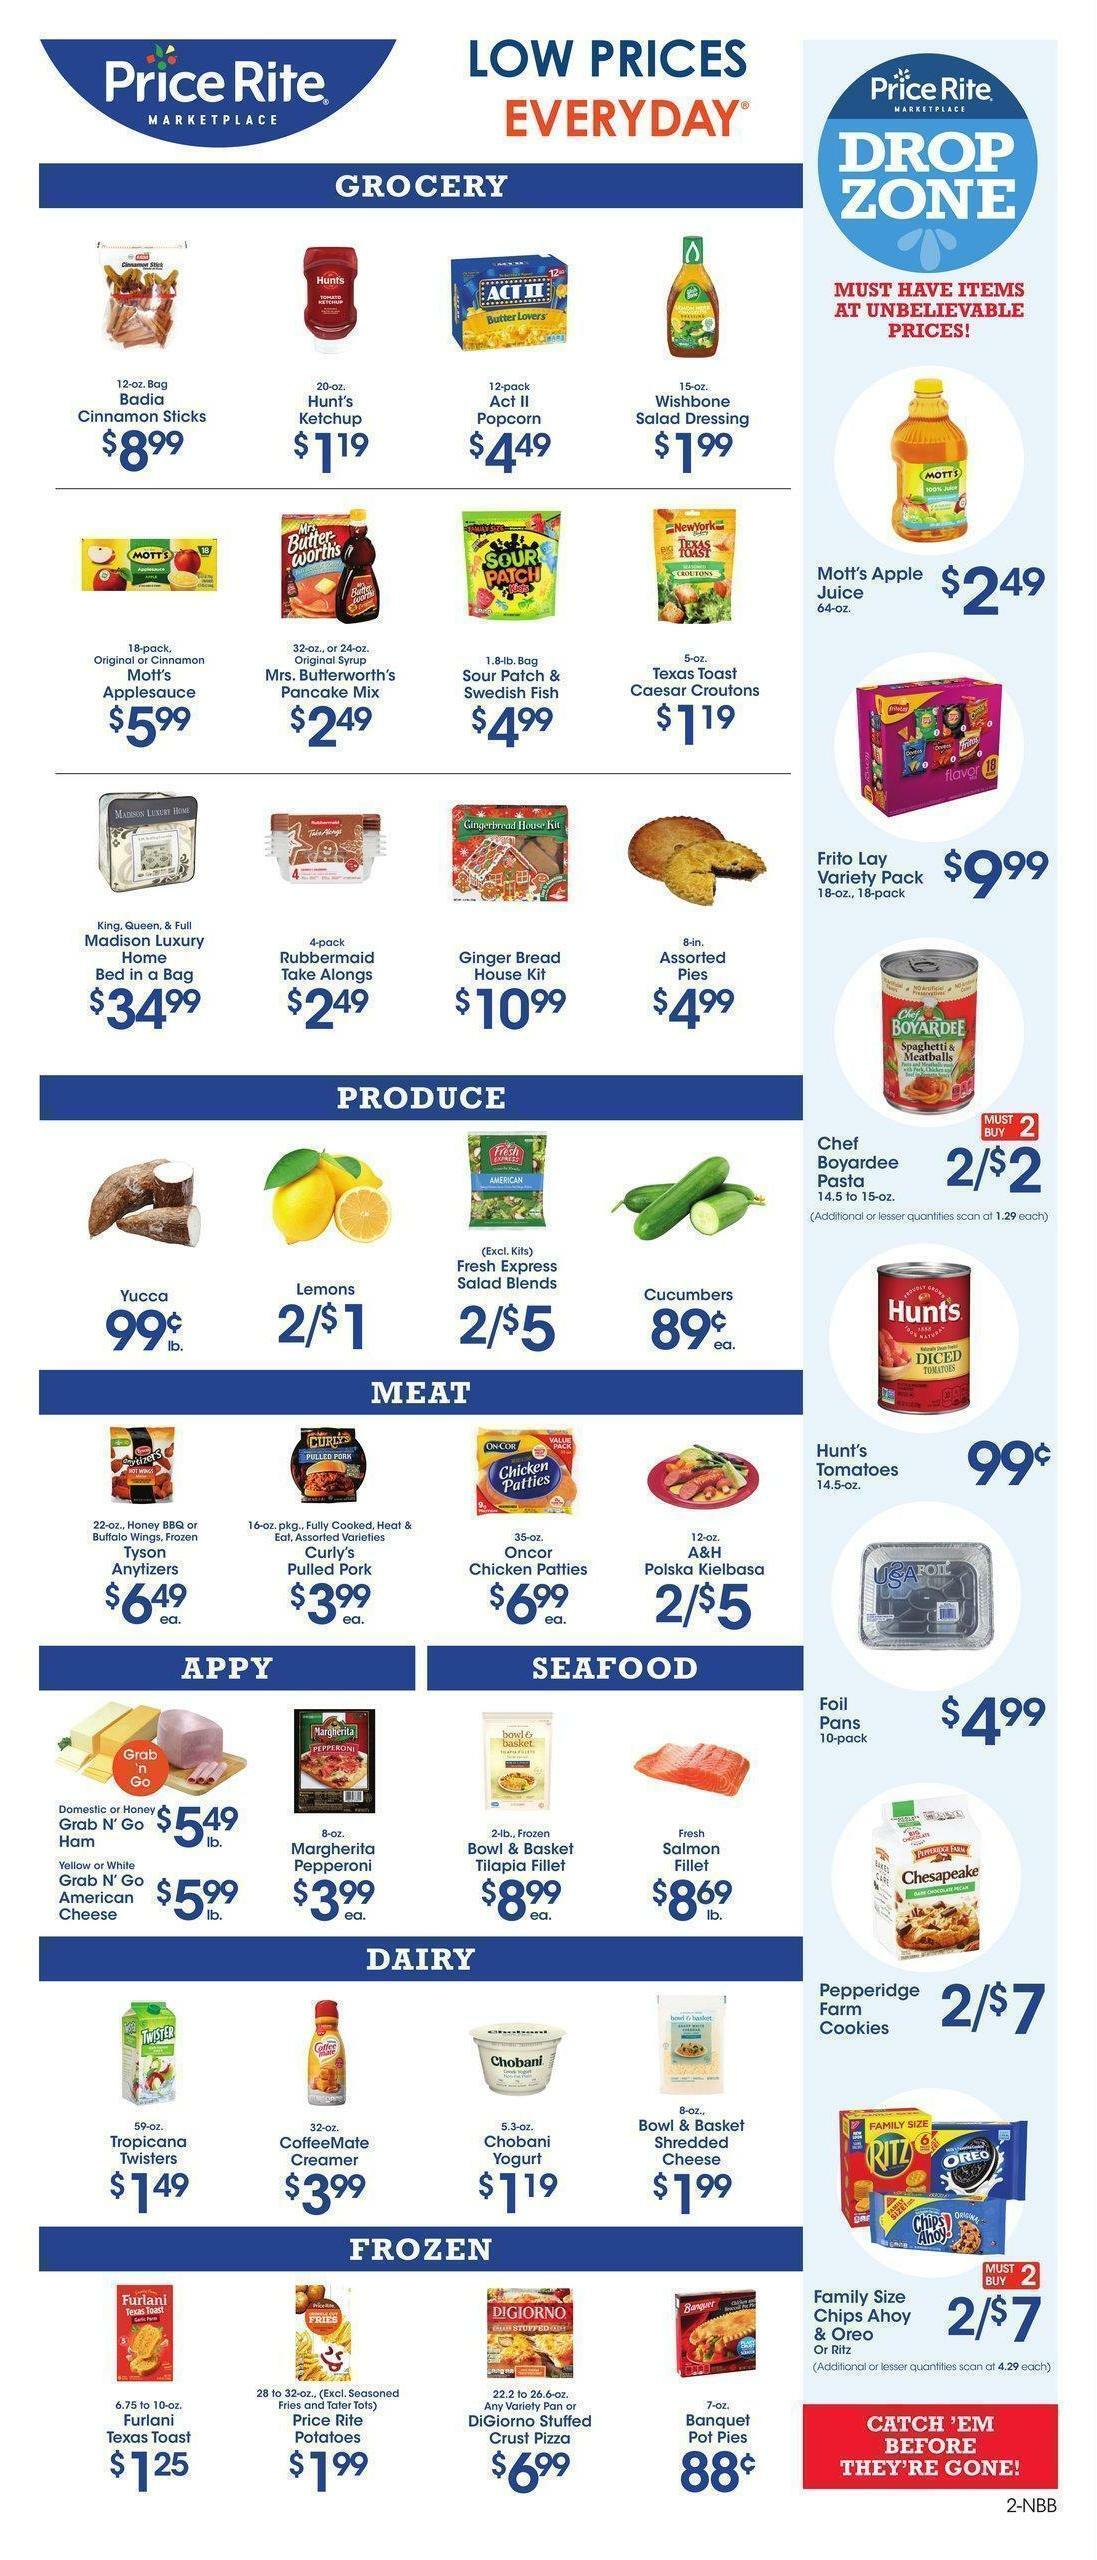 Price Rite Weekly Ad from November 25